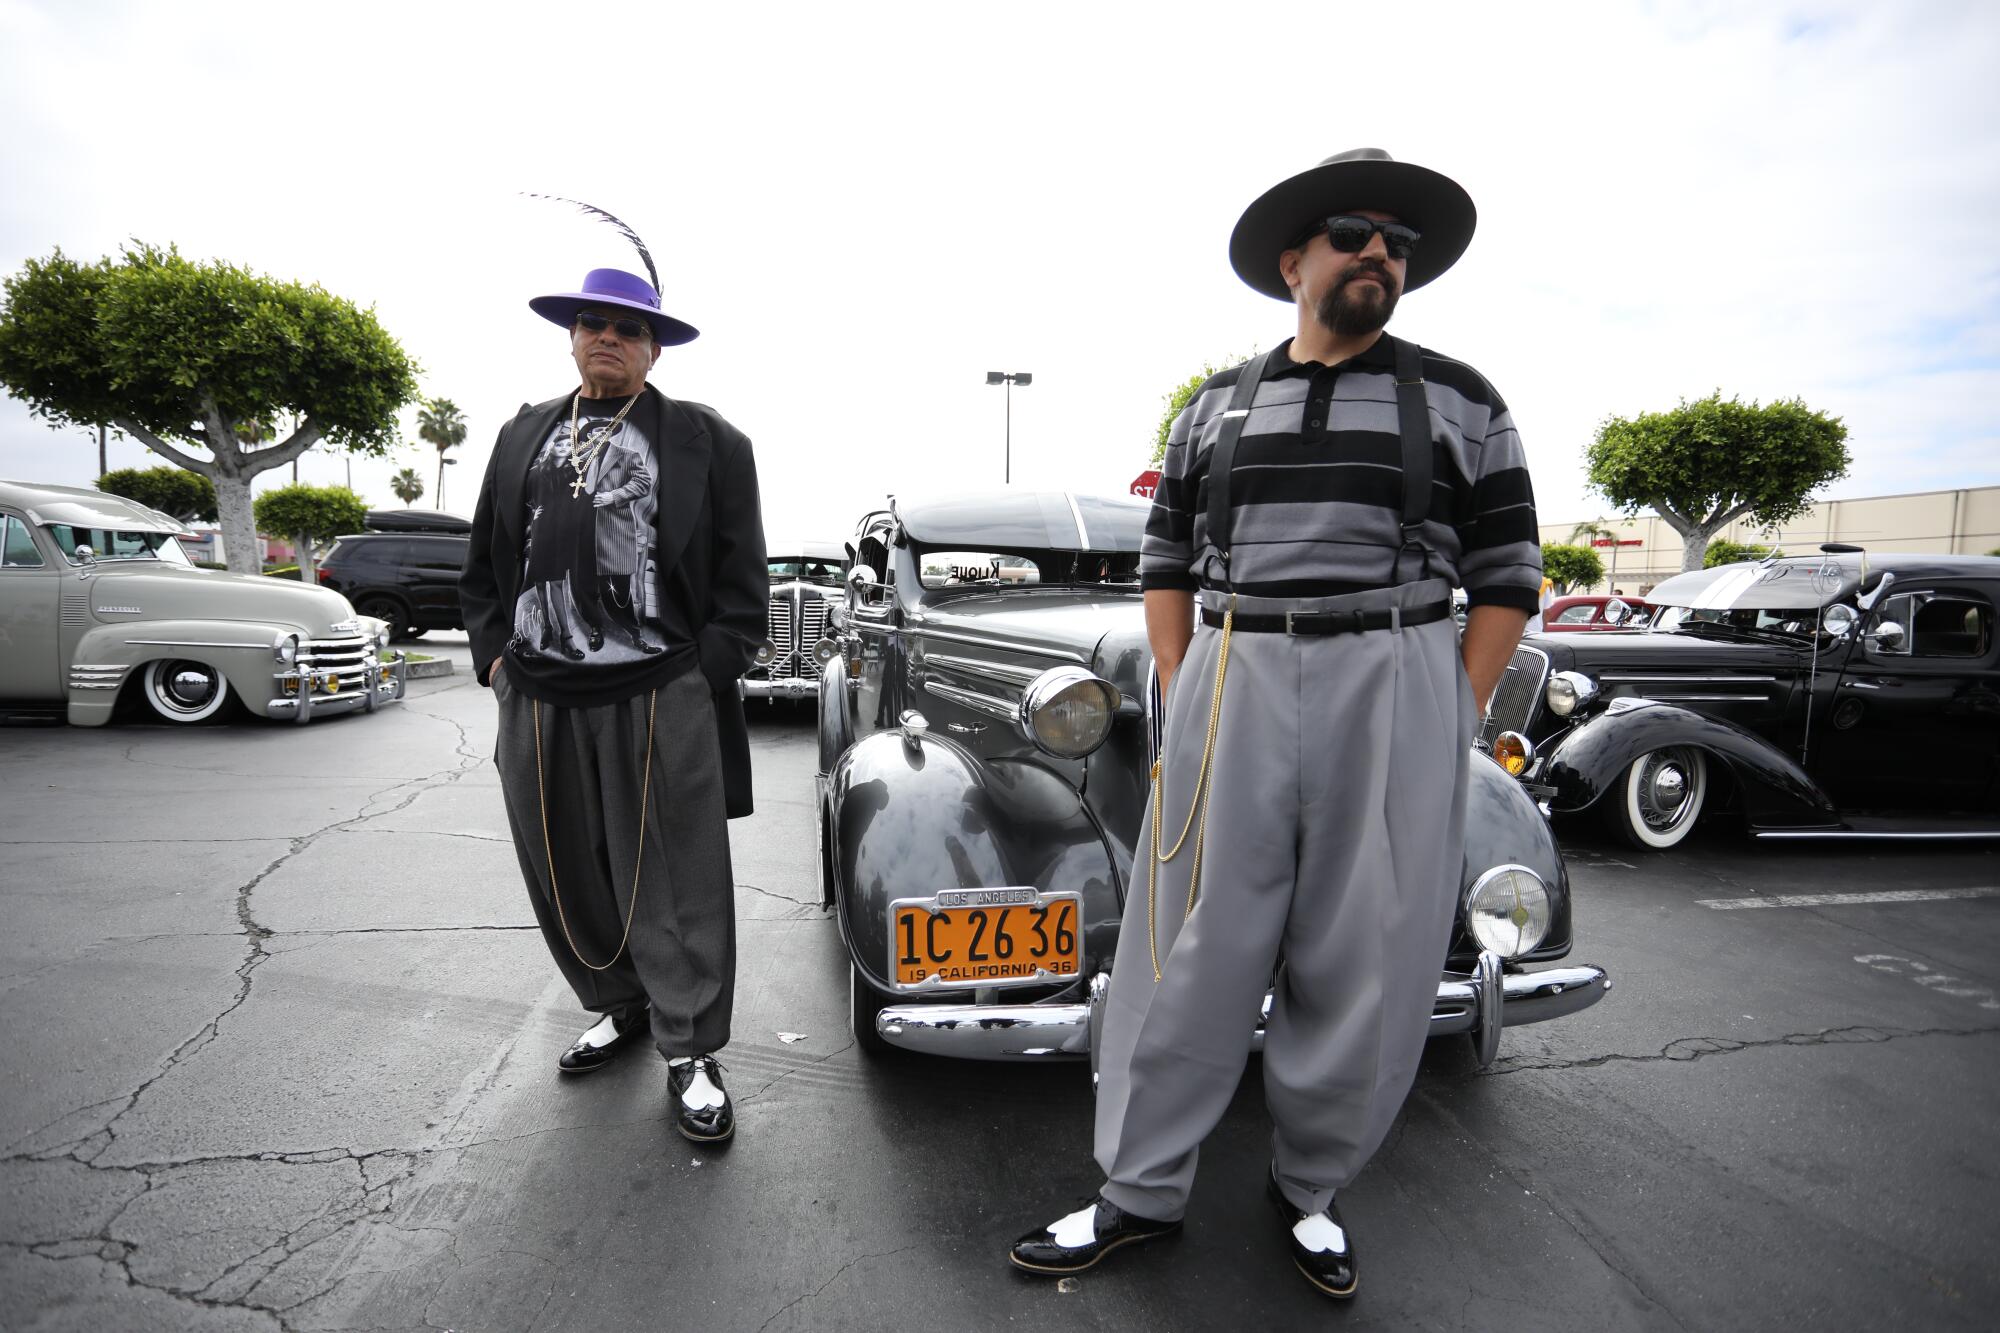 Two men in pants pegged at the ankle, with long chains, hats and shining saddle shoes, stand near classic cars.